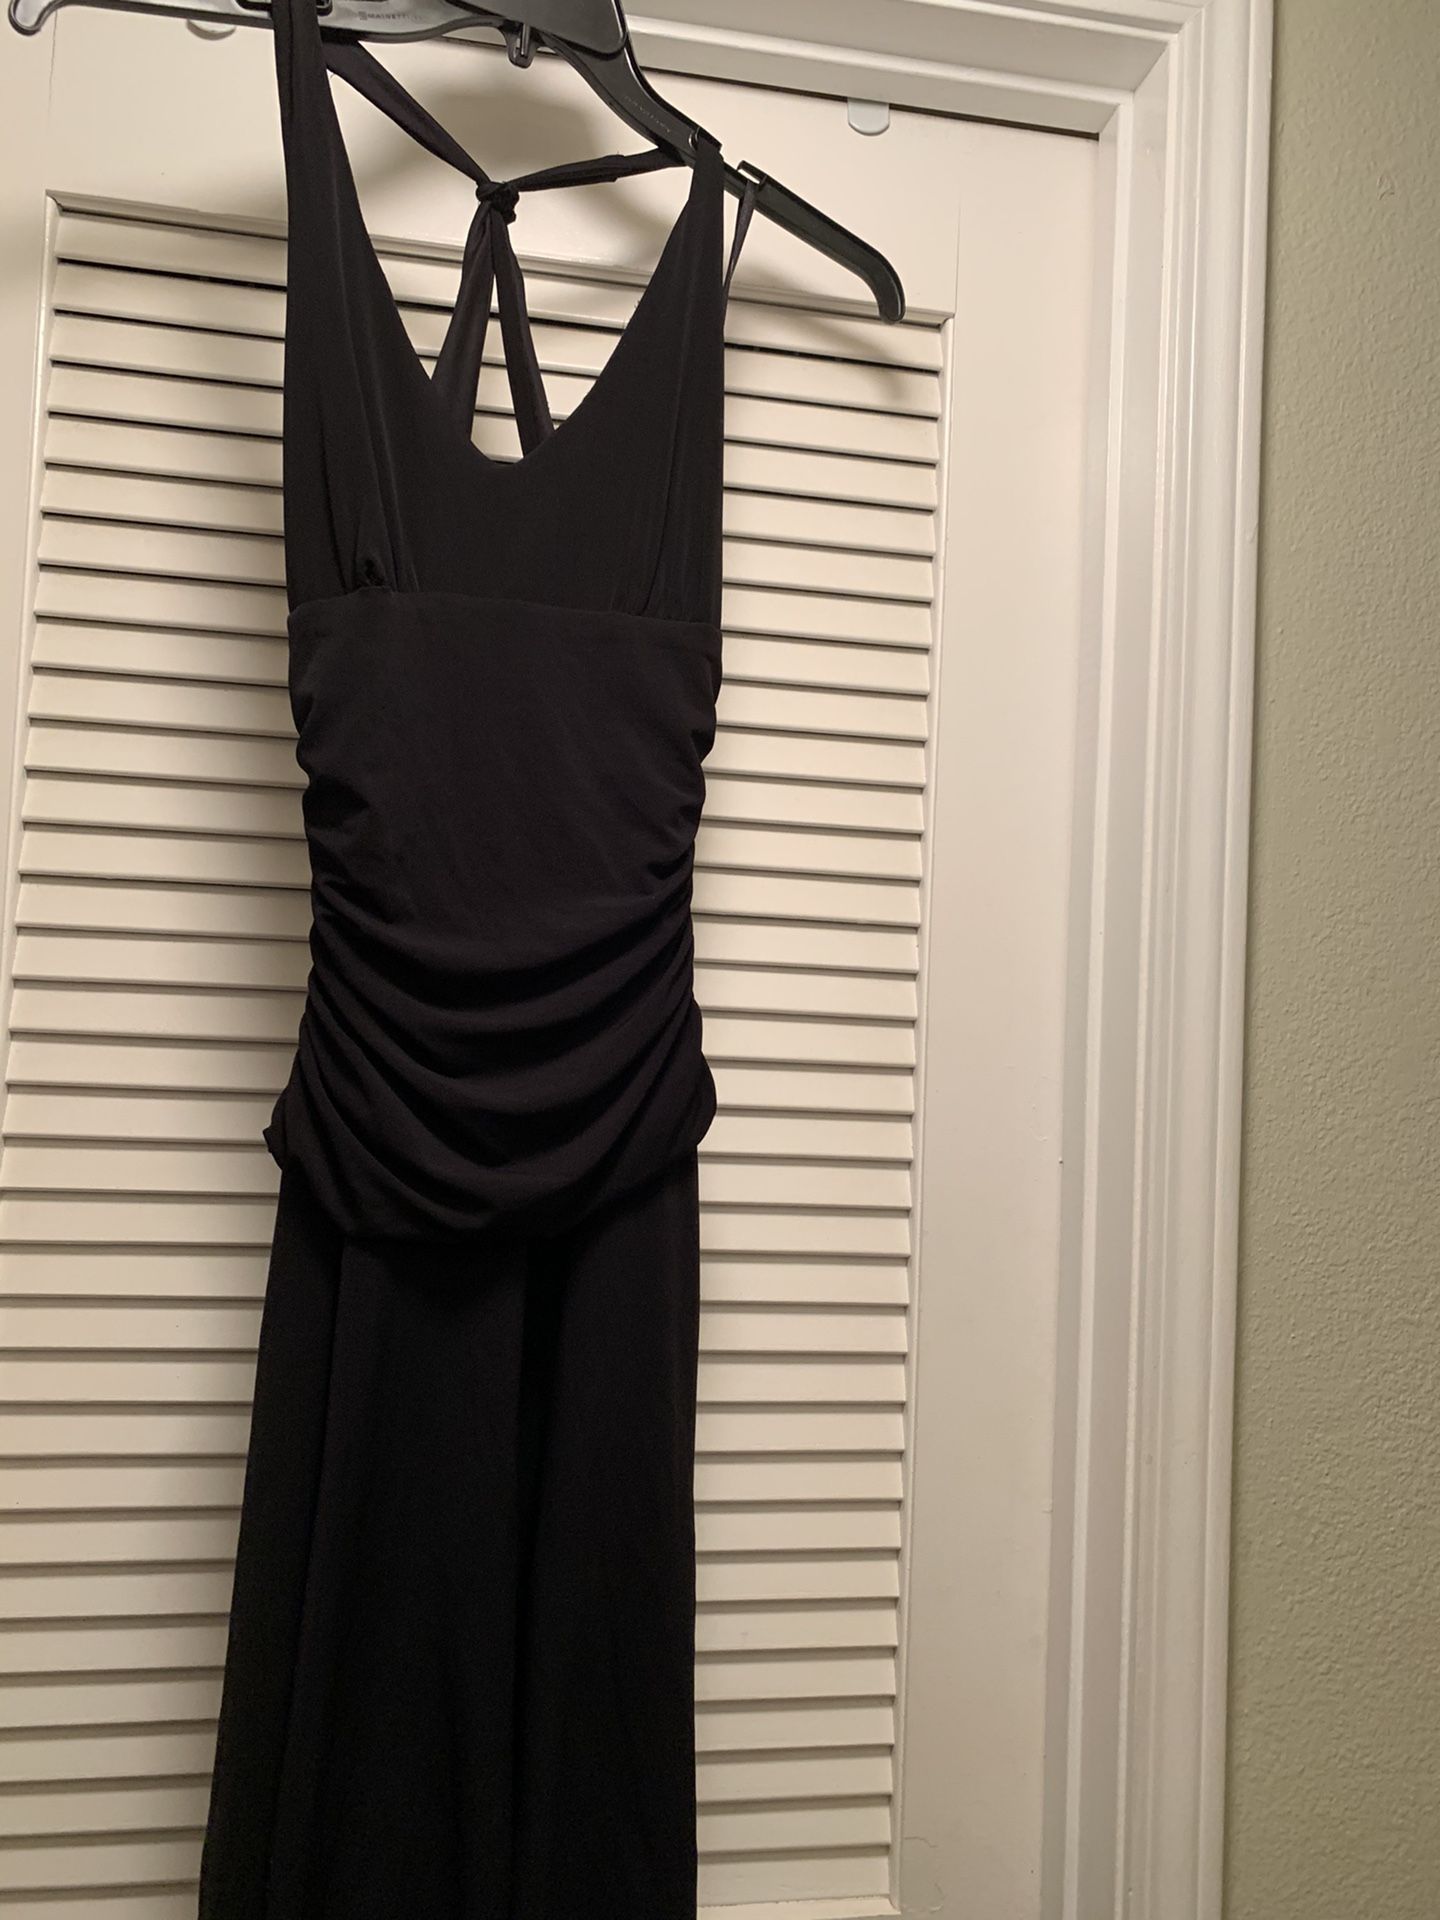 Cute little black dress. Soft material. Size small. Halter style back.